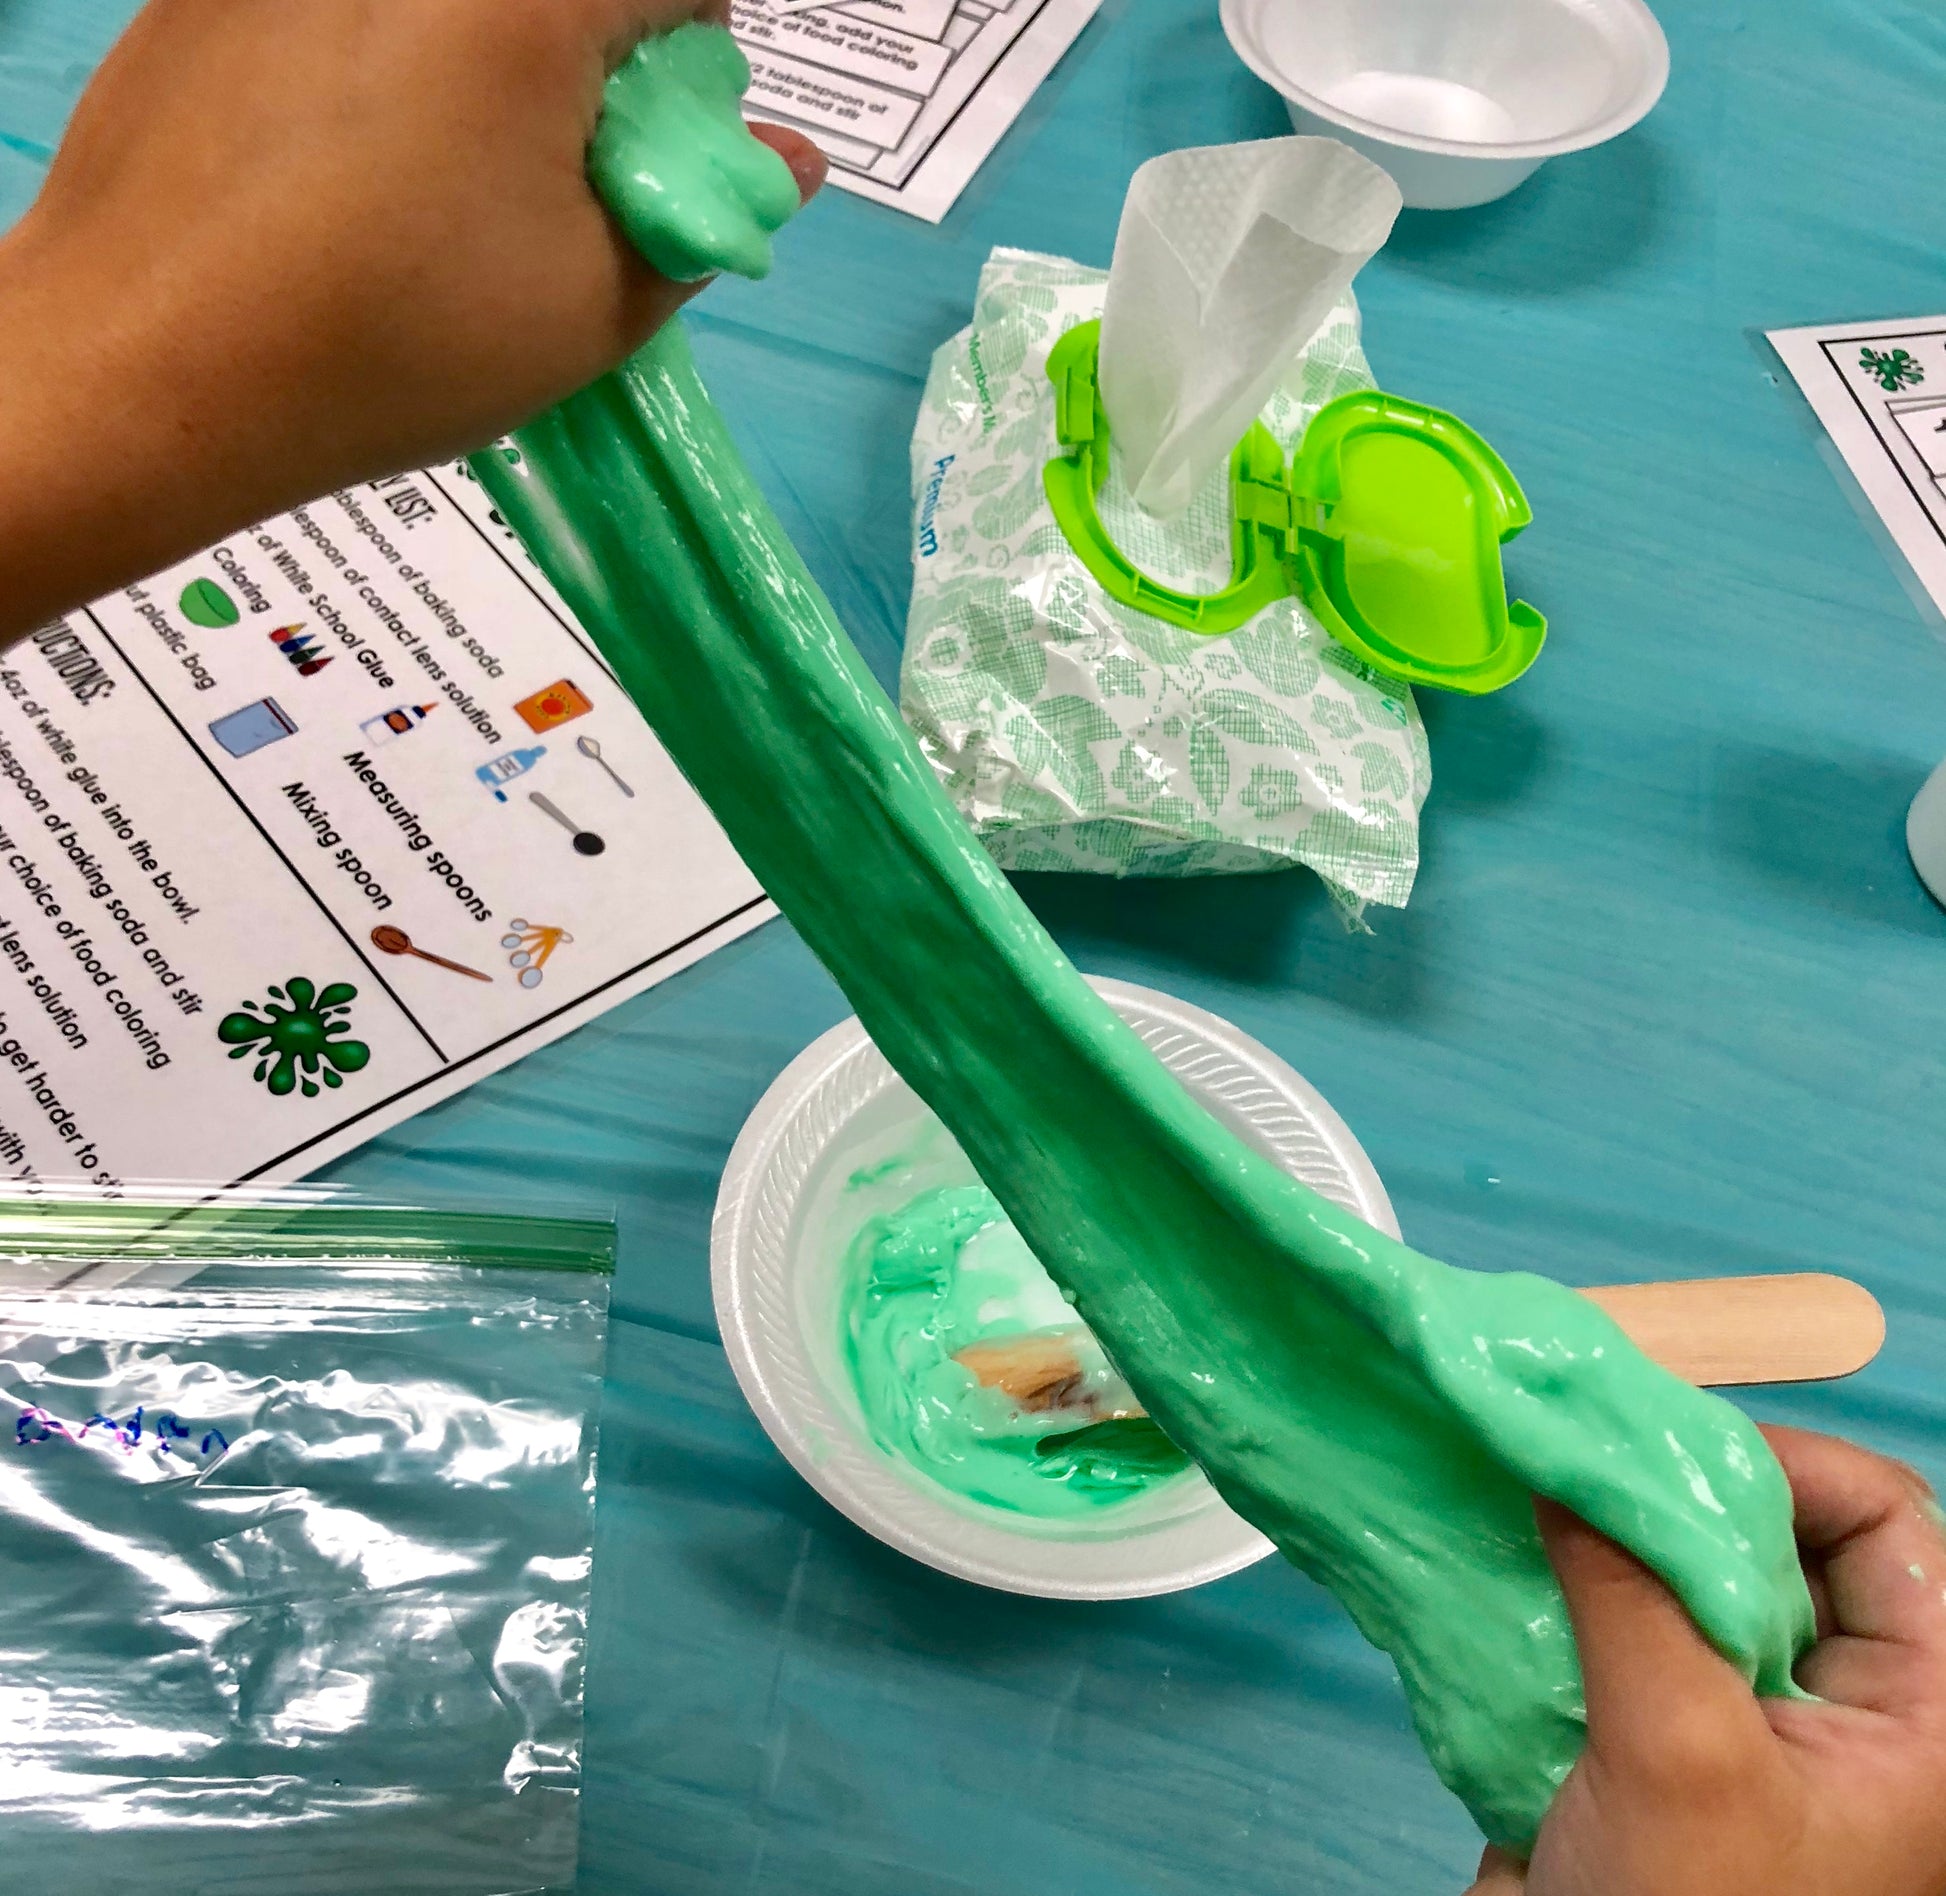 Slime Recipe (following directions, sequencing)